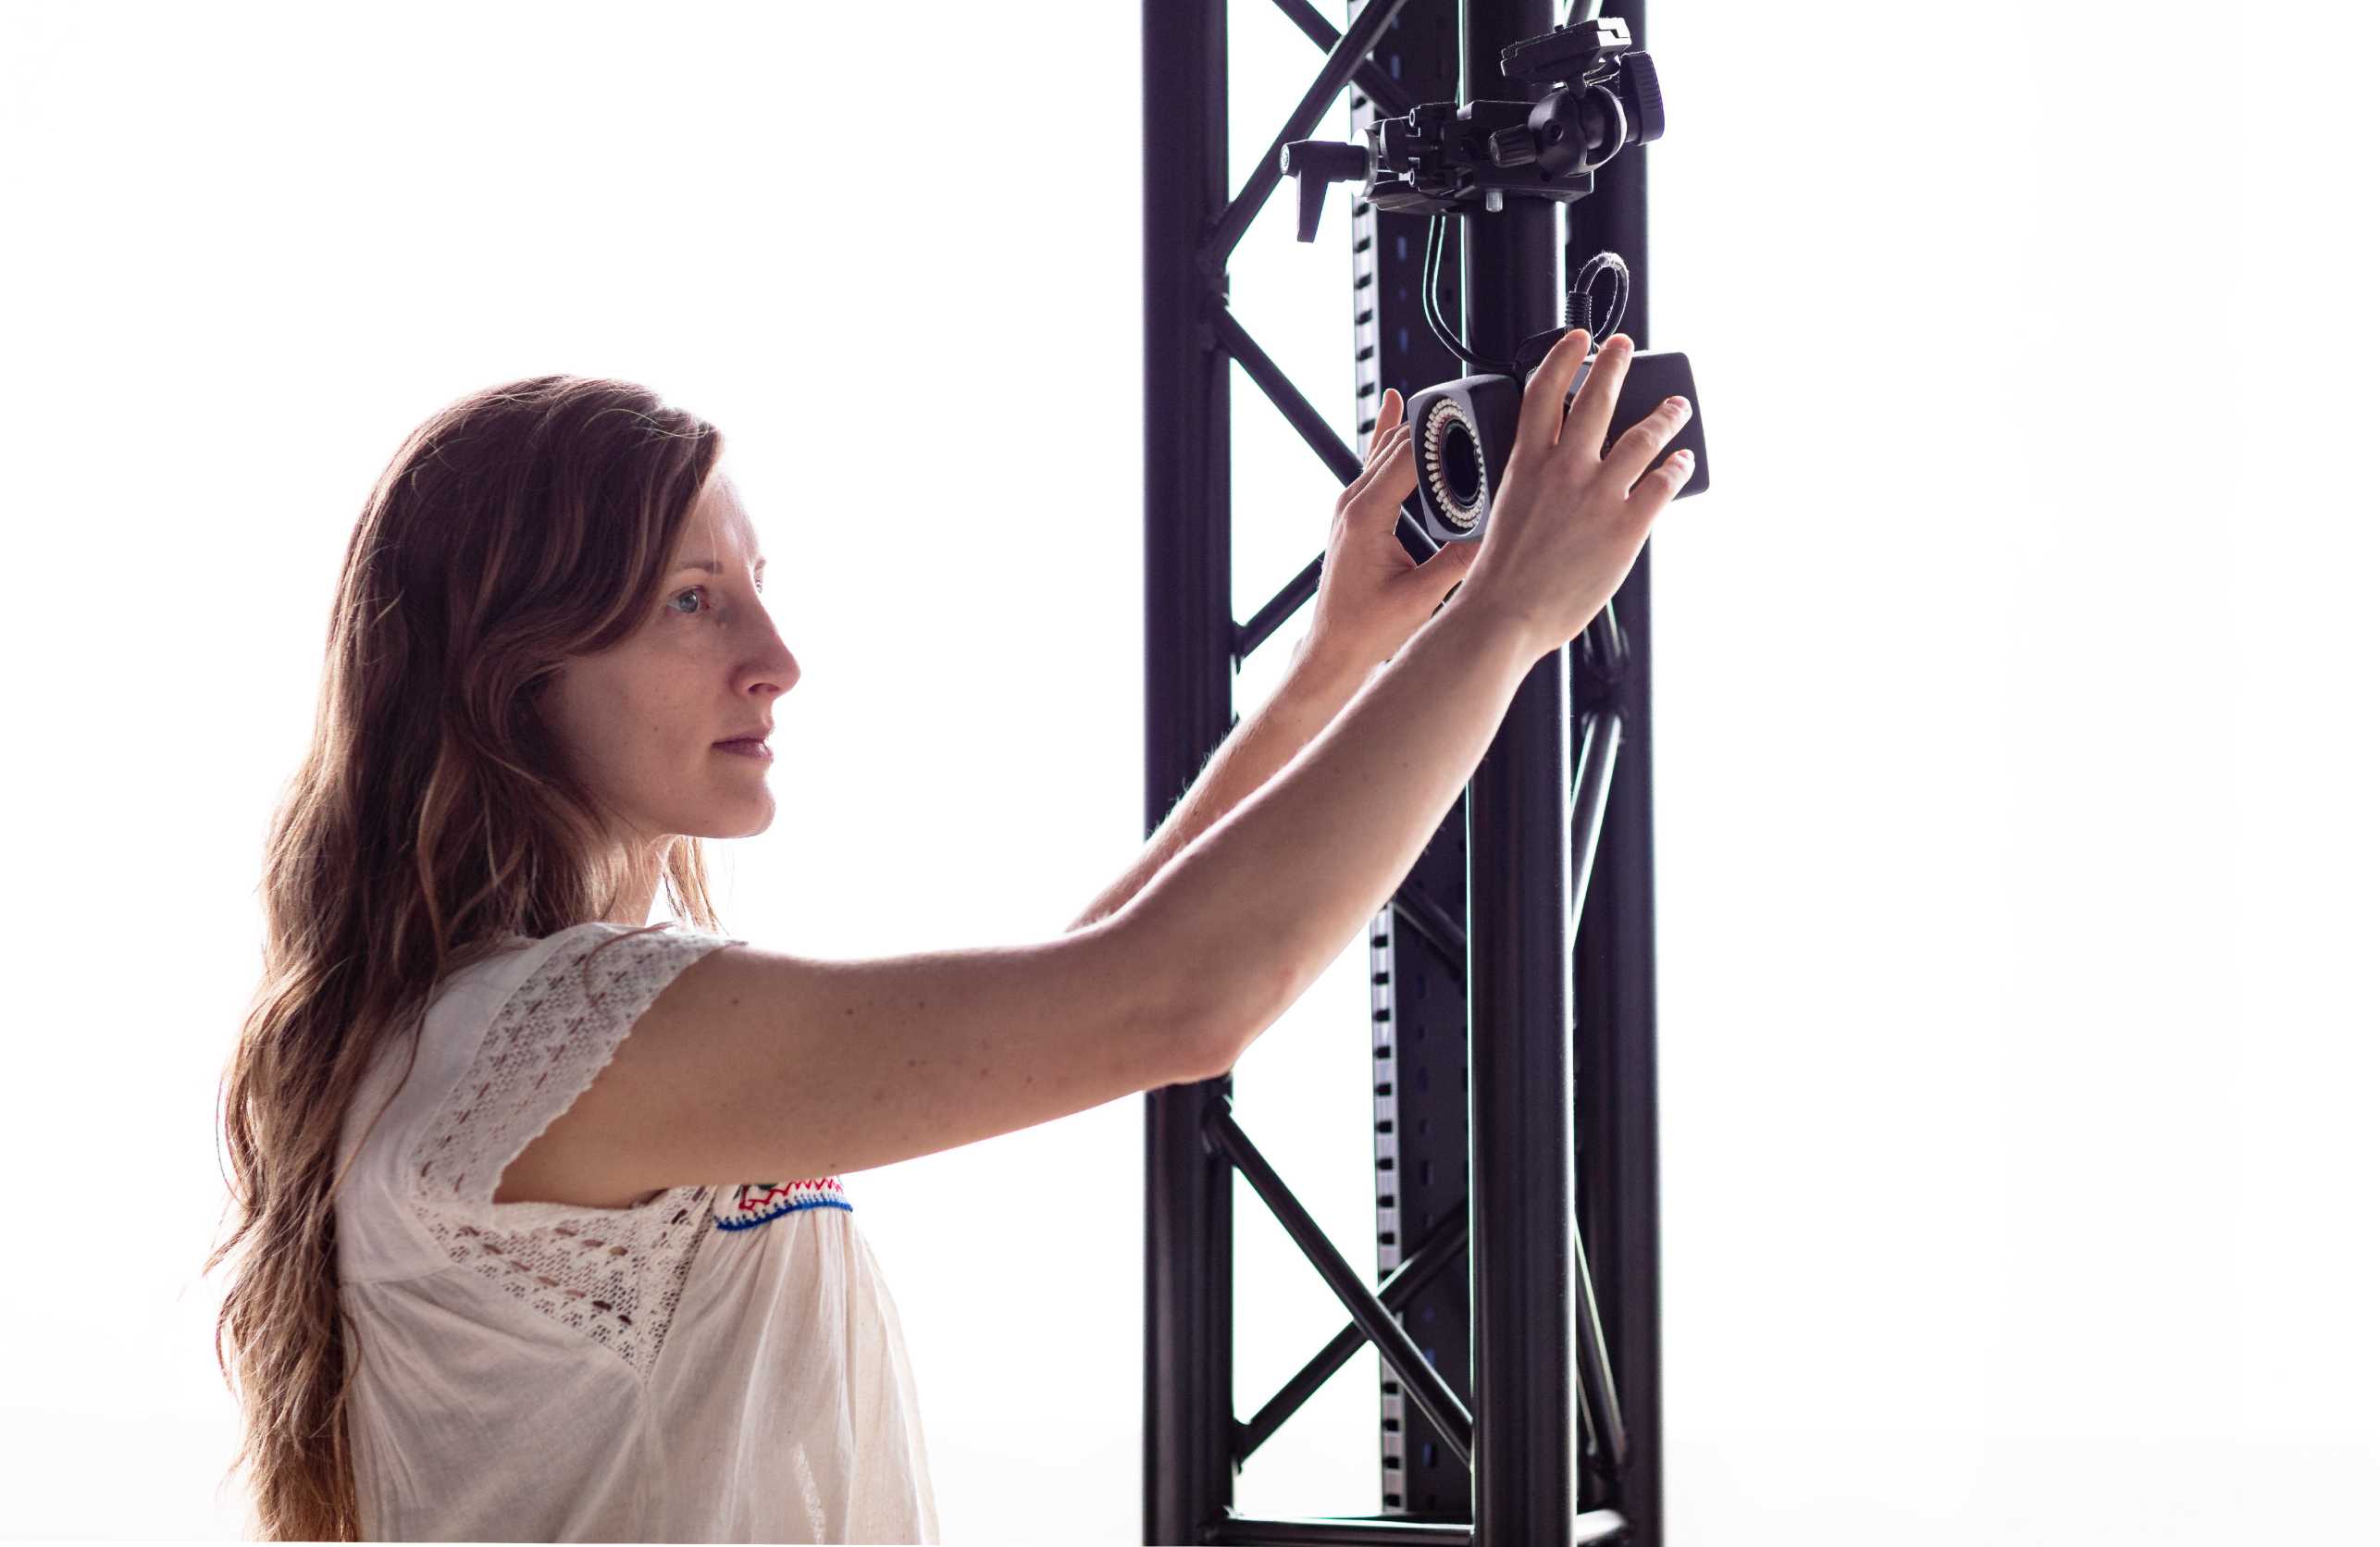 Enlarged view: Person (Aileen Naef) working on a motion capture camera